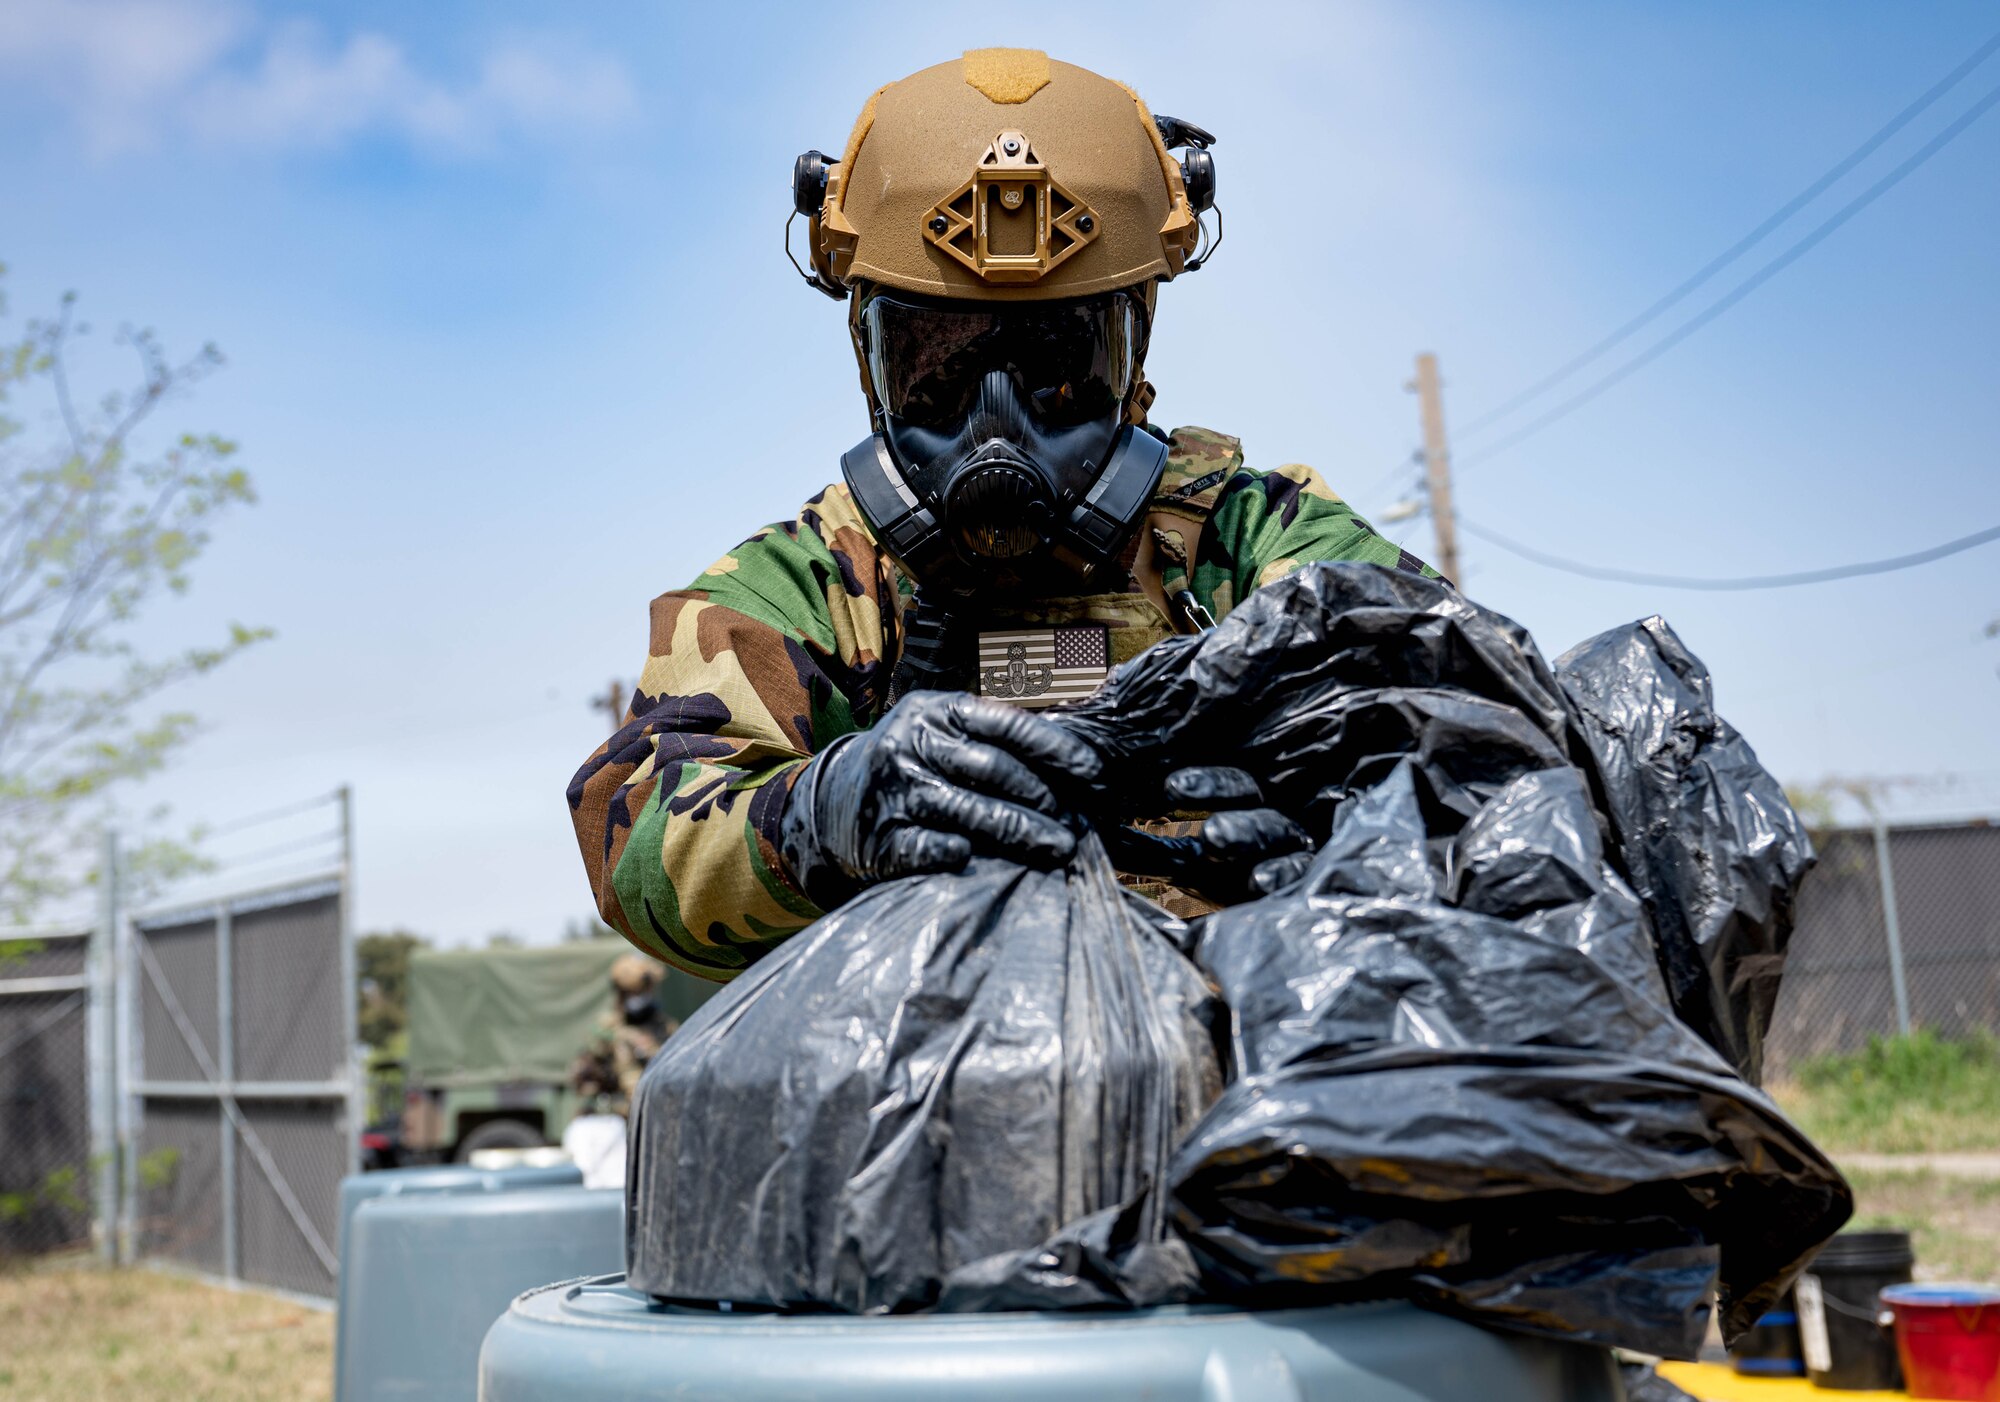 Senior Airman Charles James, 8th Civil Engineer Squadron explosive ordnance disposal technician, secures chemical ordnance in a plastic bag during a training event at Kunsan Air Base, Republic of Korea, April 20, 2023. EOD members were tasked with mitigating hazards from leaking chemical munitions. (U.S. Air Force photo illustration by Senior Airman Shannon Braaten)